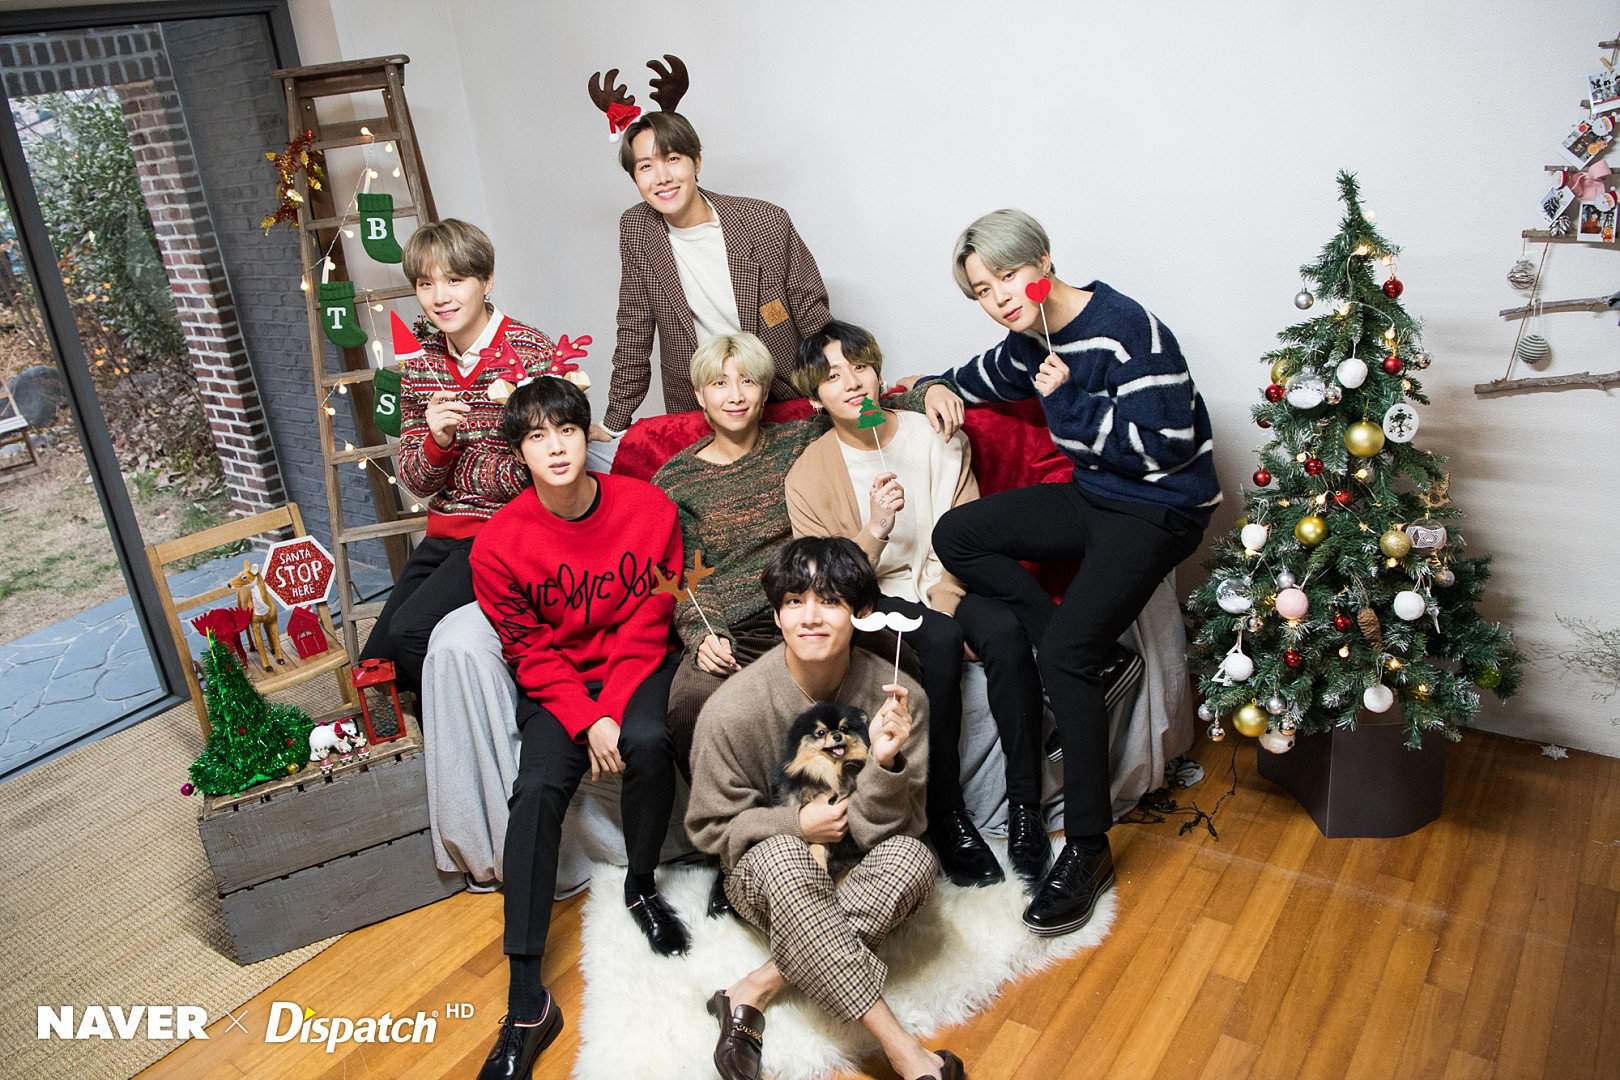 NAVER DISPATCH RELEASES ALL NEW BTS PHOTOS & VIDEOS FOR CHRISTMAS | BTS